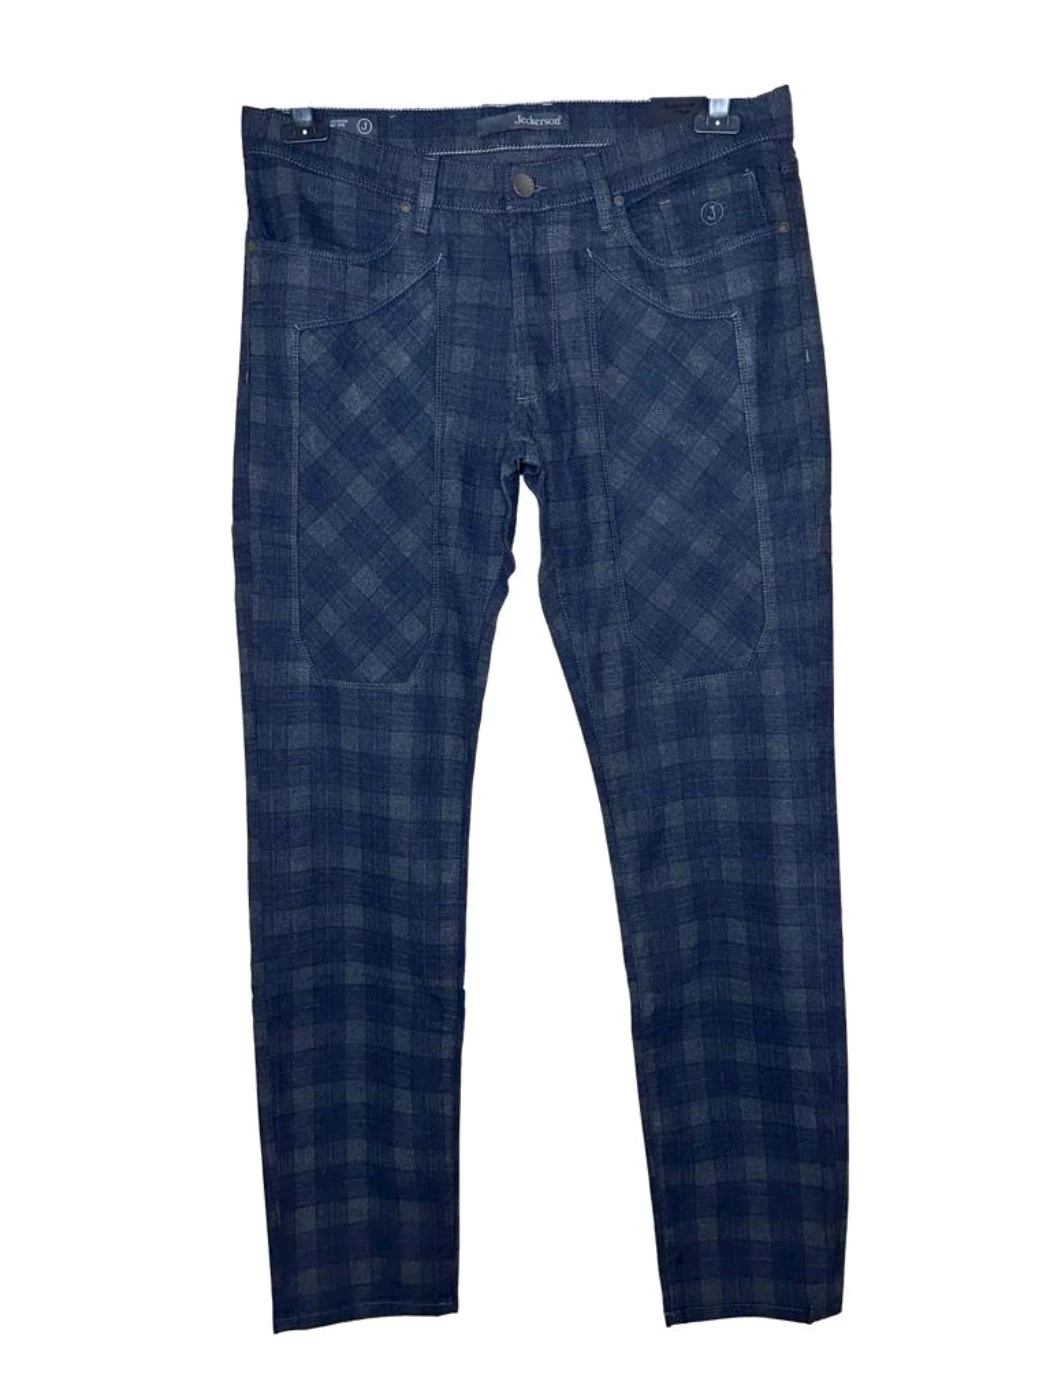 Jeckerson patterned trousers